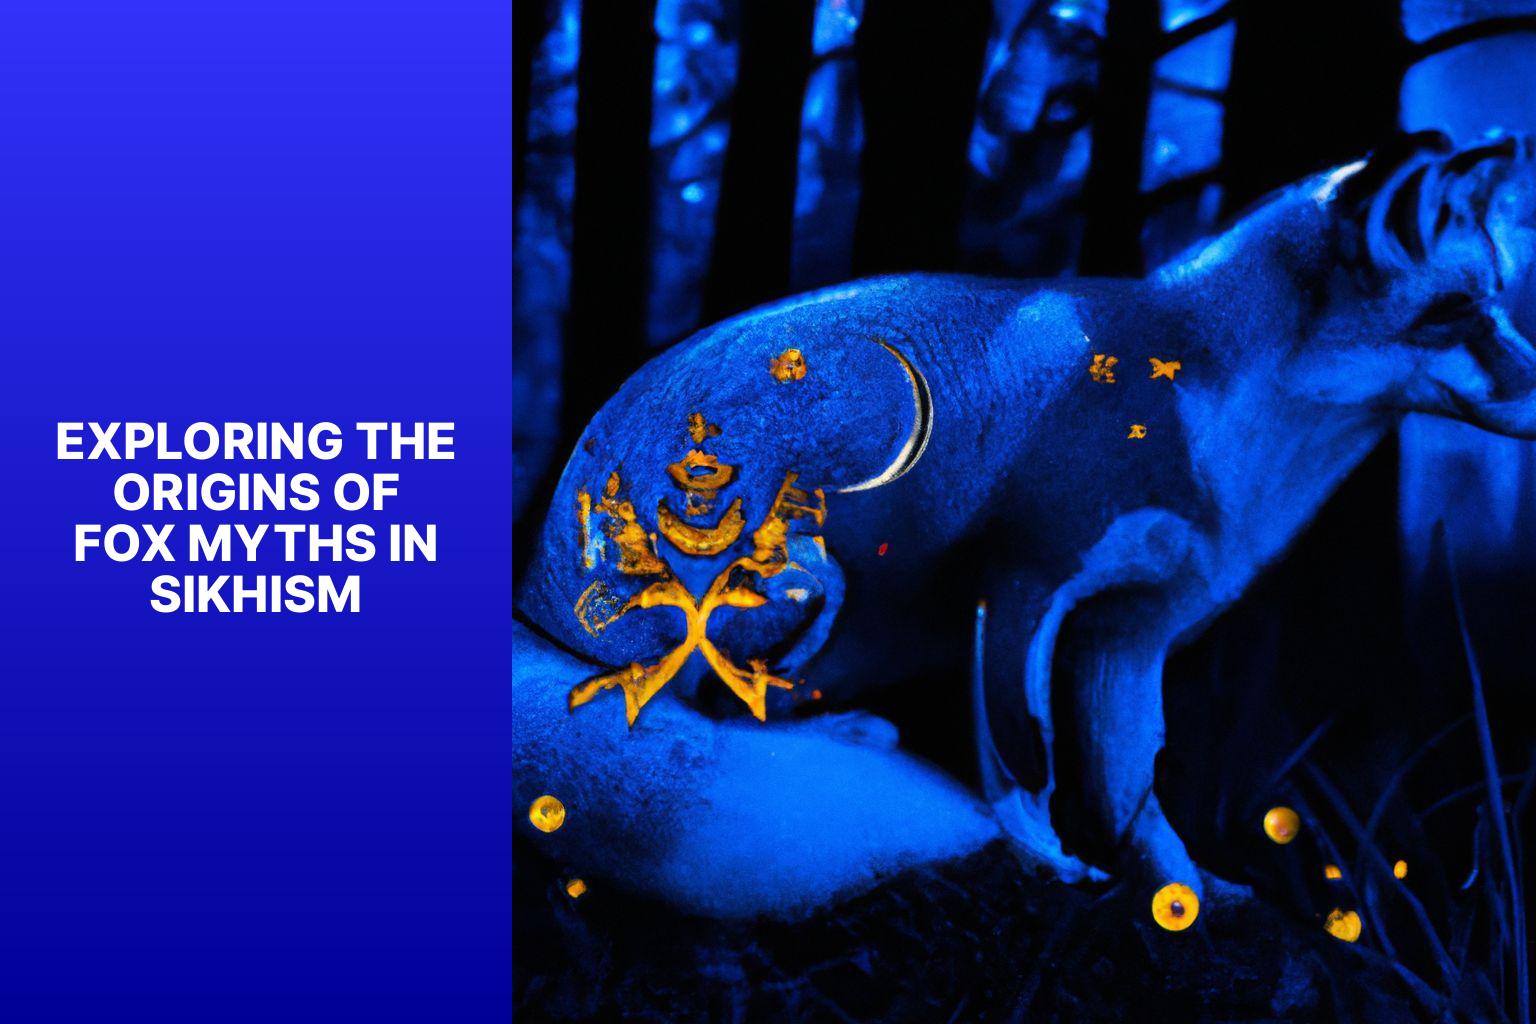 Exploring the Origins of Fox Myths in Sikhism - Fox Myths in Sikhism 